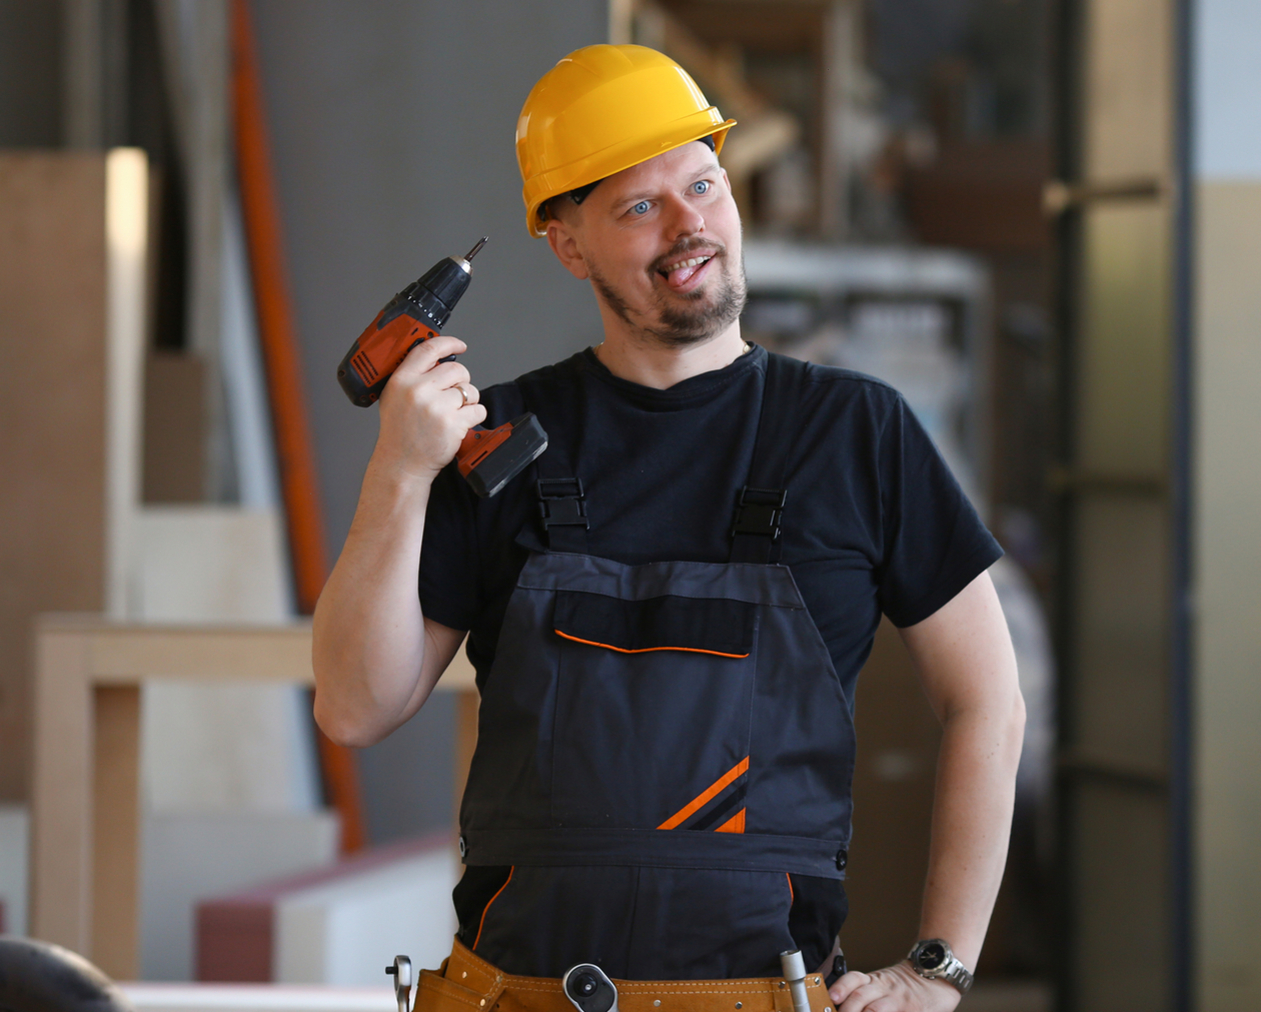 Construction man with hard hat and drill